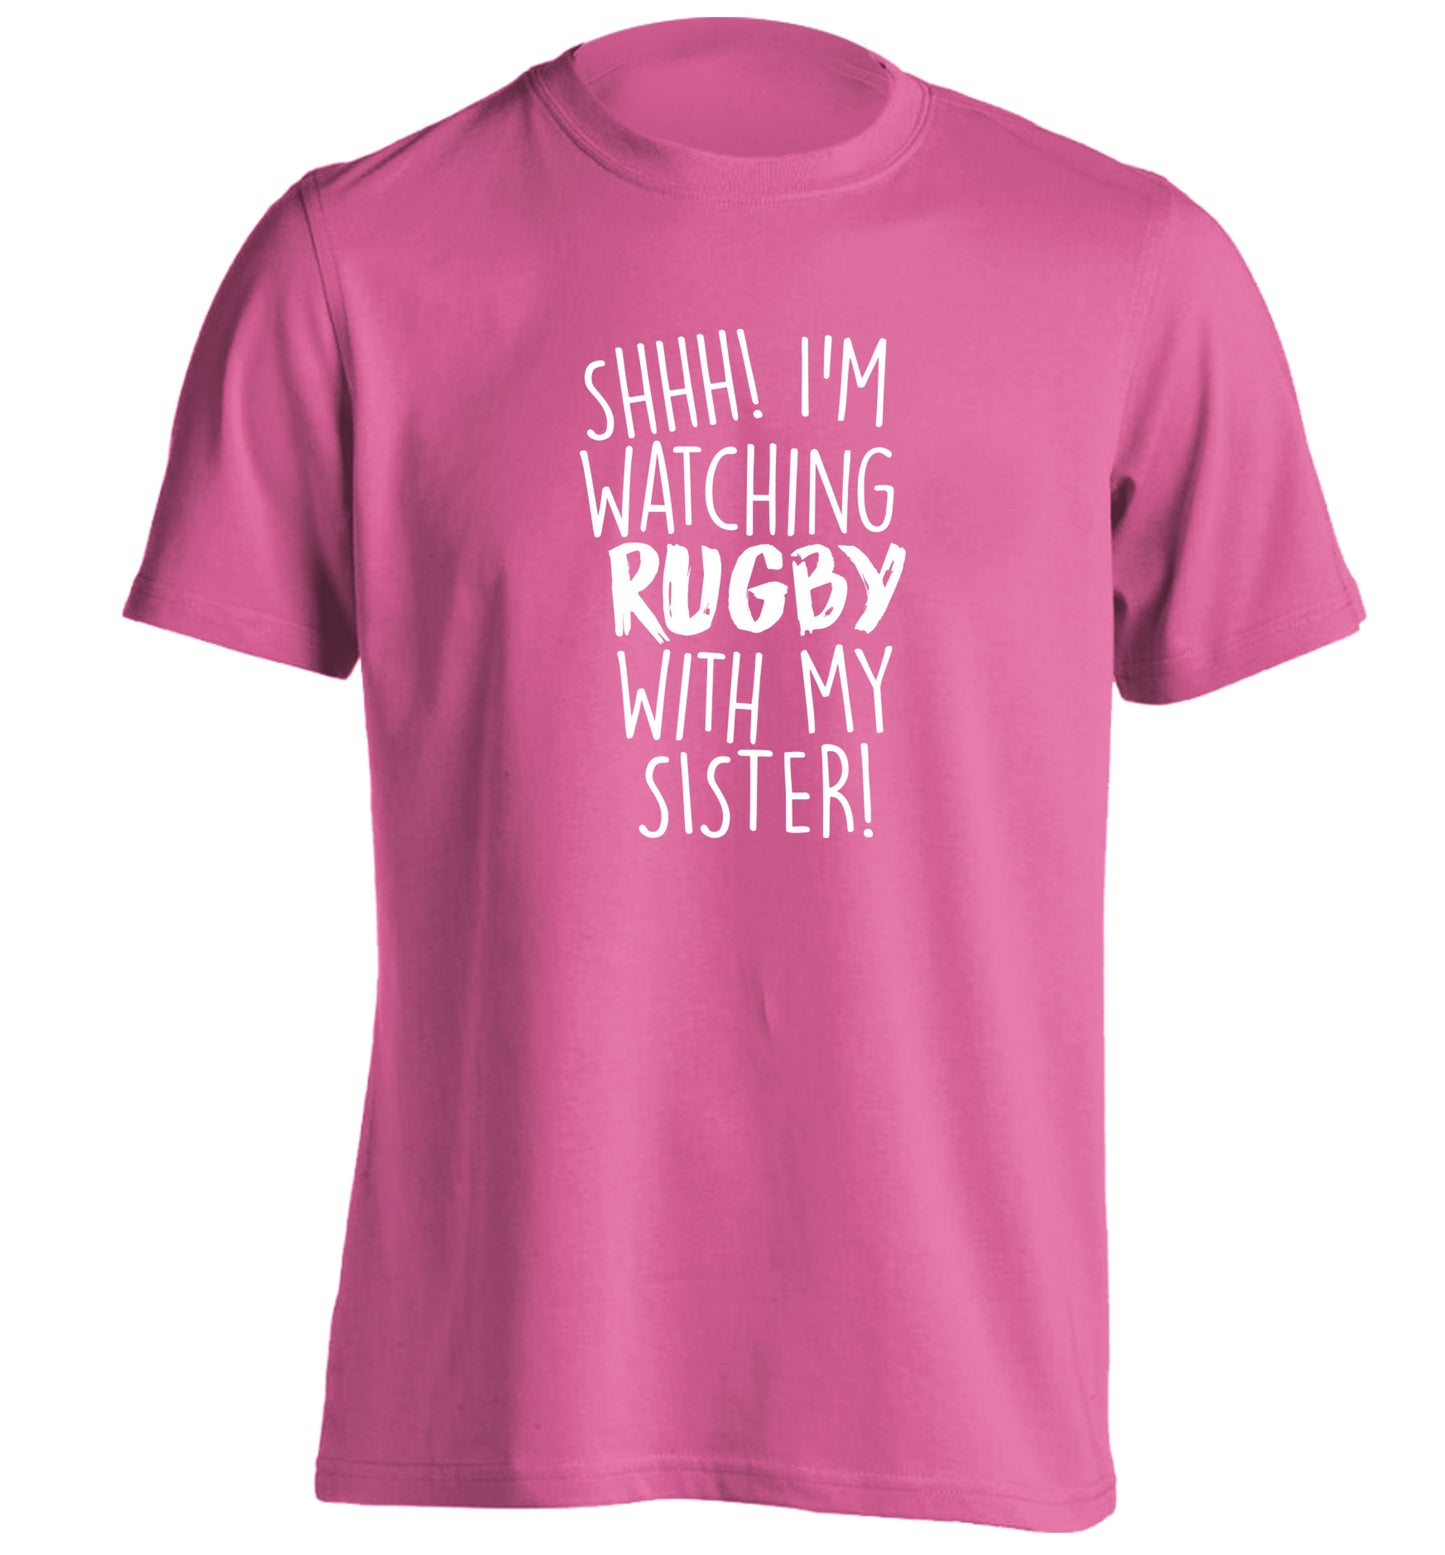 Shh... I'm watching rugby with my sister adults unisex pink Tshirt 2XL